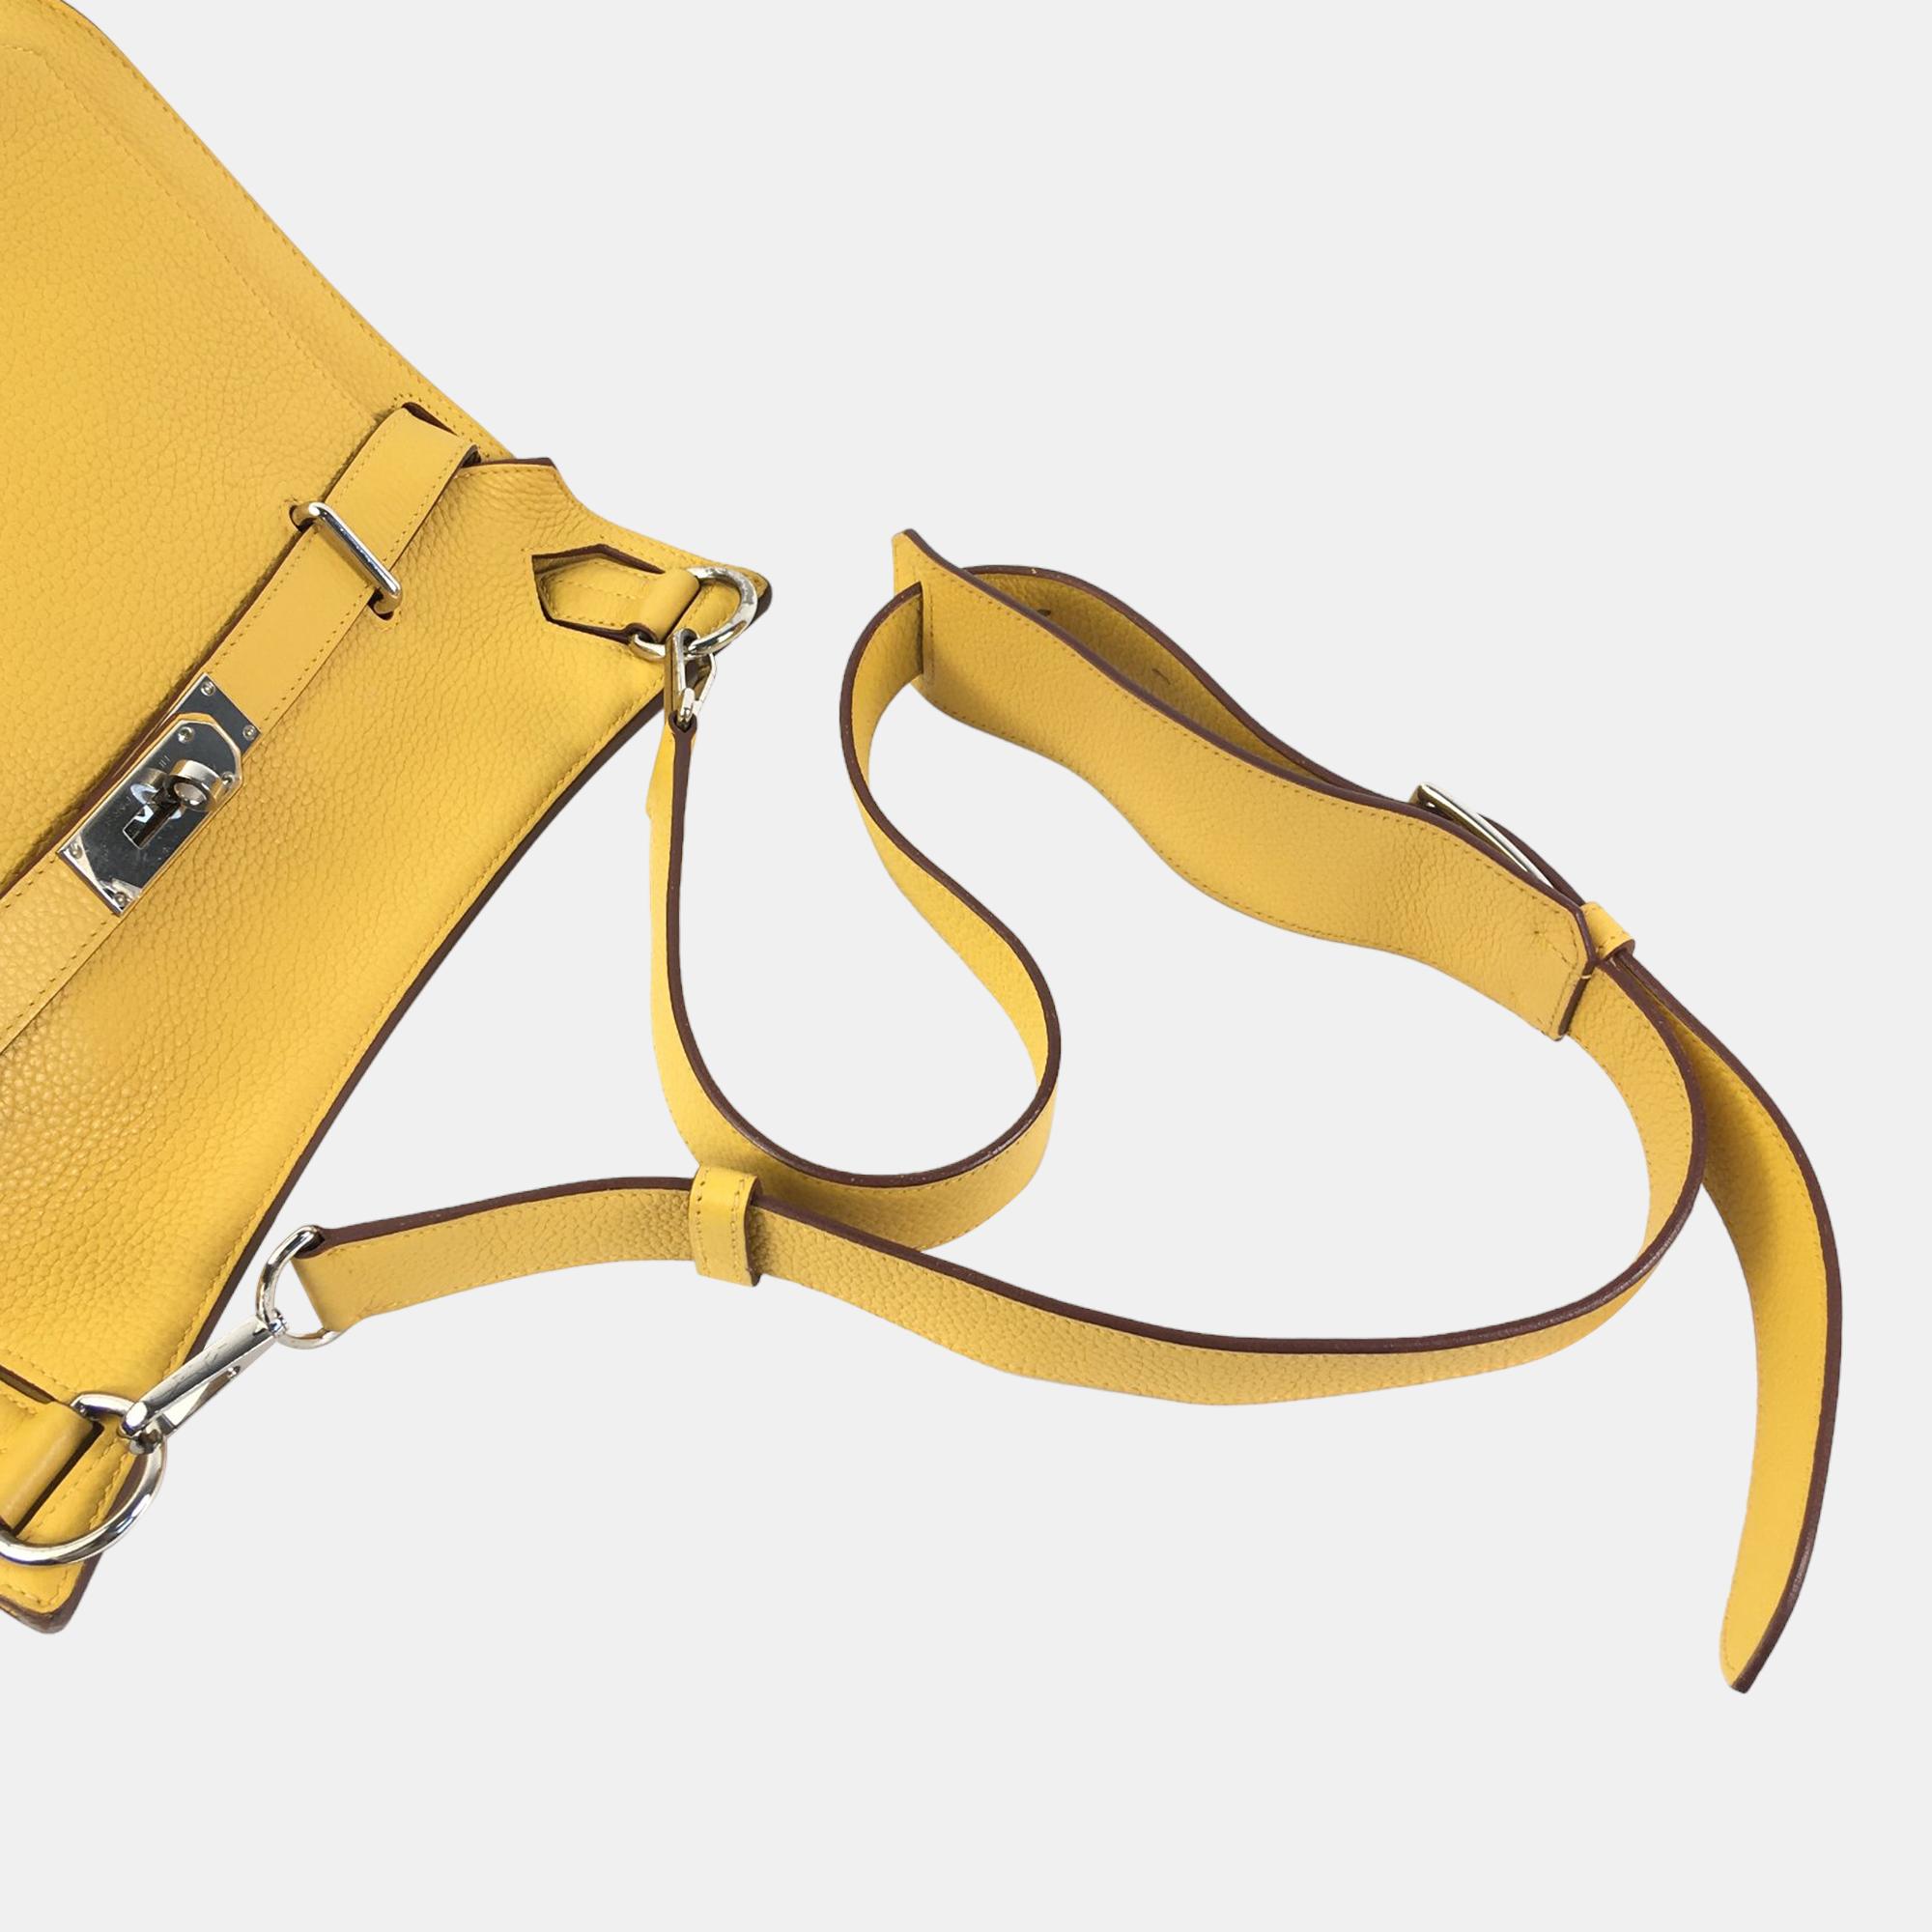 Hermes Yellow Taurillon Clemence Jypsiere 34